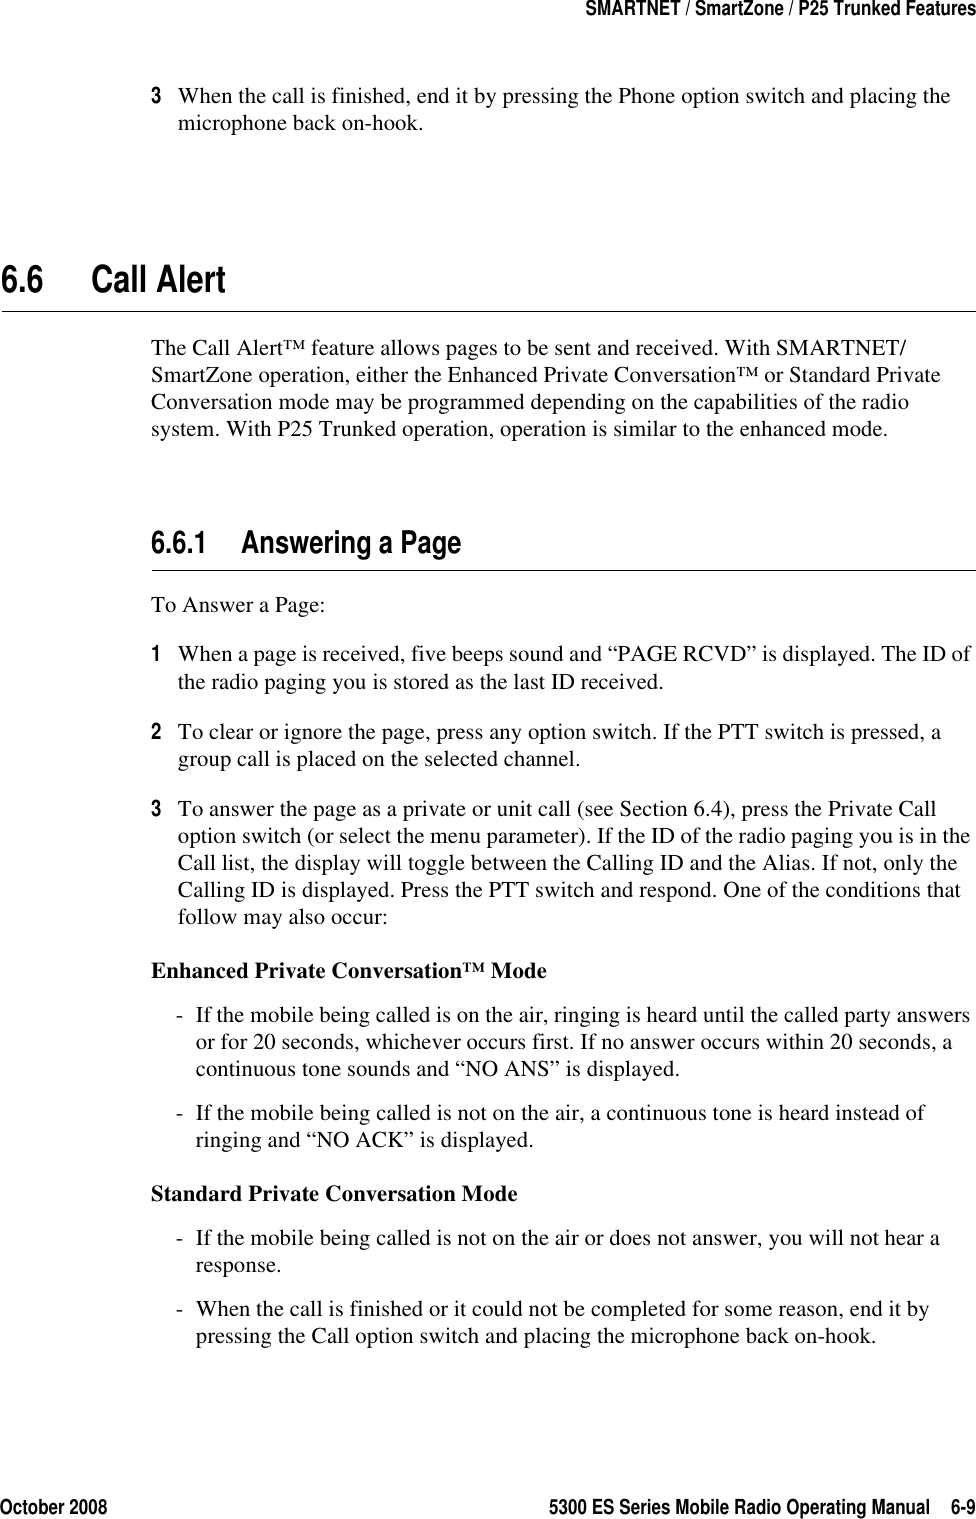 October 2008 5300 ES Series Mobile Radio Operating Manual 6-9SMARTNET / SmartZone / P25 Trunked Features3When the call is finished, end it by pressing the Phone option switch and placing the microphone back on-hook.6.6 Call Alert The Call Alert™ feature allows pages to be sent and received. With SMARTNET/SmartZone operation, either the Enhanced Private Conversation™ or Standard Private Conversation mode may be programmed depending on the capabilities of the radio system. With P25 Trunked operation, operation is similar to the enhanced mode.6.6.1 Answering a PageTo Answer a Page:1When a page is received, five beeps sound and “PAGE RCVD” is displayed. The ID of the radio paging you is stored as the last ID received.2To clear or ignore the page, press any option switch. If the PTT switch is pressed, a group call is placed on the selected channel.3To answer the page as a private or unit call (see Section 6.4), press the Private Call option switch (or select the menu parameter). If the ID of the radio paging you is in the Call list, the display will toggle between the Calling ID and the Alias. If not, only the Calling ID is displayed. Press the PTT switch and respond. One of the conditions that follow may also occur:Enhanced Private Conversation™ Mode- If the mobile being called is on the air, ringing is heard until the called party answers or for 20 seconds, whichever occurs first. If no answer occurs within 20 seconds, a continuous tone sounds and “NO ANS” is displayed.- If the mobile being called is not on the air, a continuous tone is heard instead of ringing and “NO ACK” is displayed.Standard Private Conversation Mode- If the mobile being called is not on the air or does not answer, you will not hear a response.- When the call is finished or it could not be completed for some reason, end it by pressing the Call option switch and placing the microphone back on-hook.